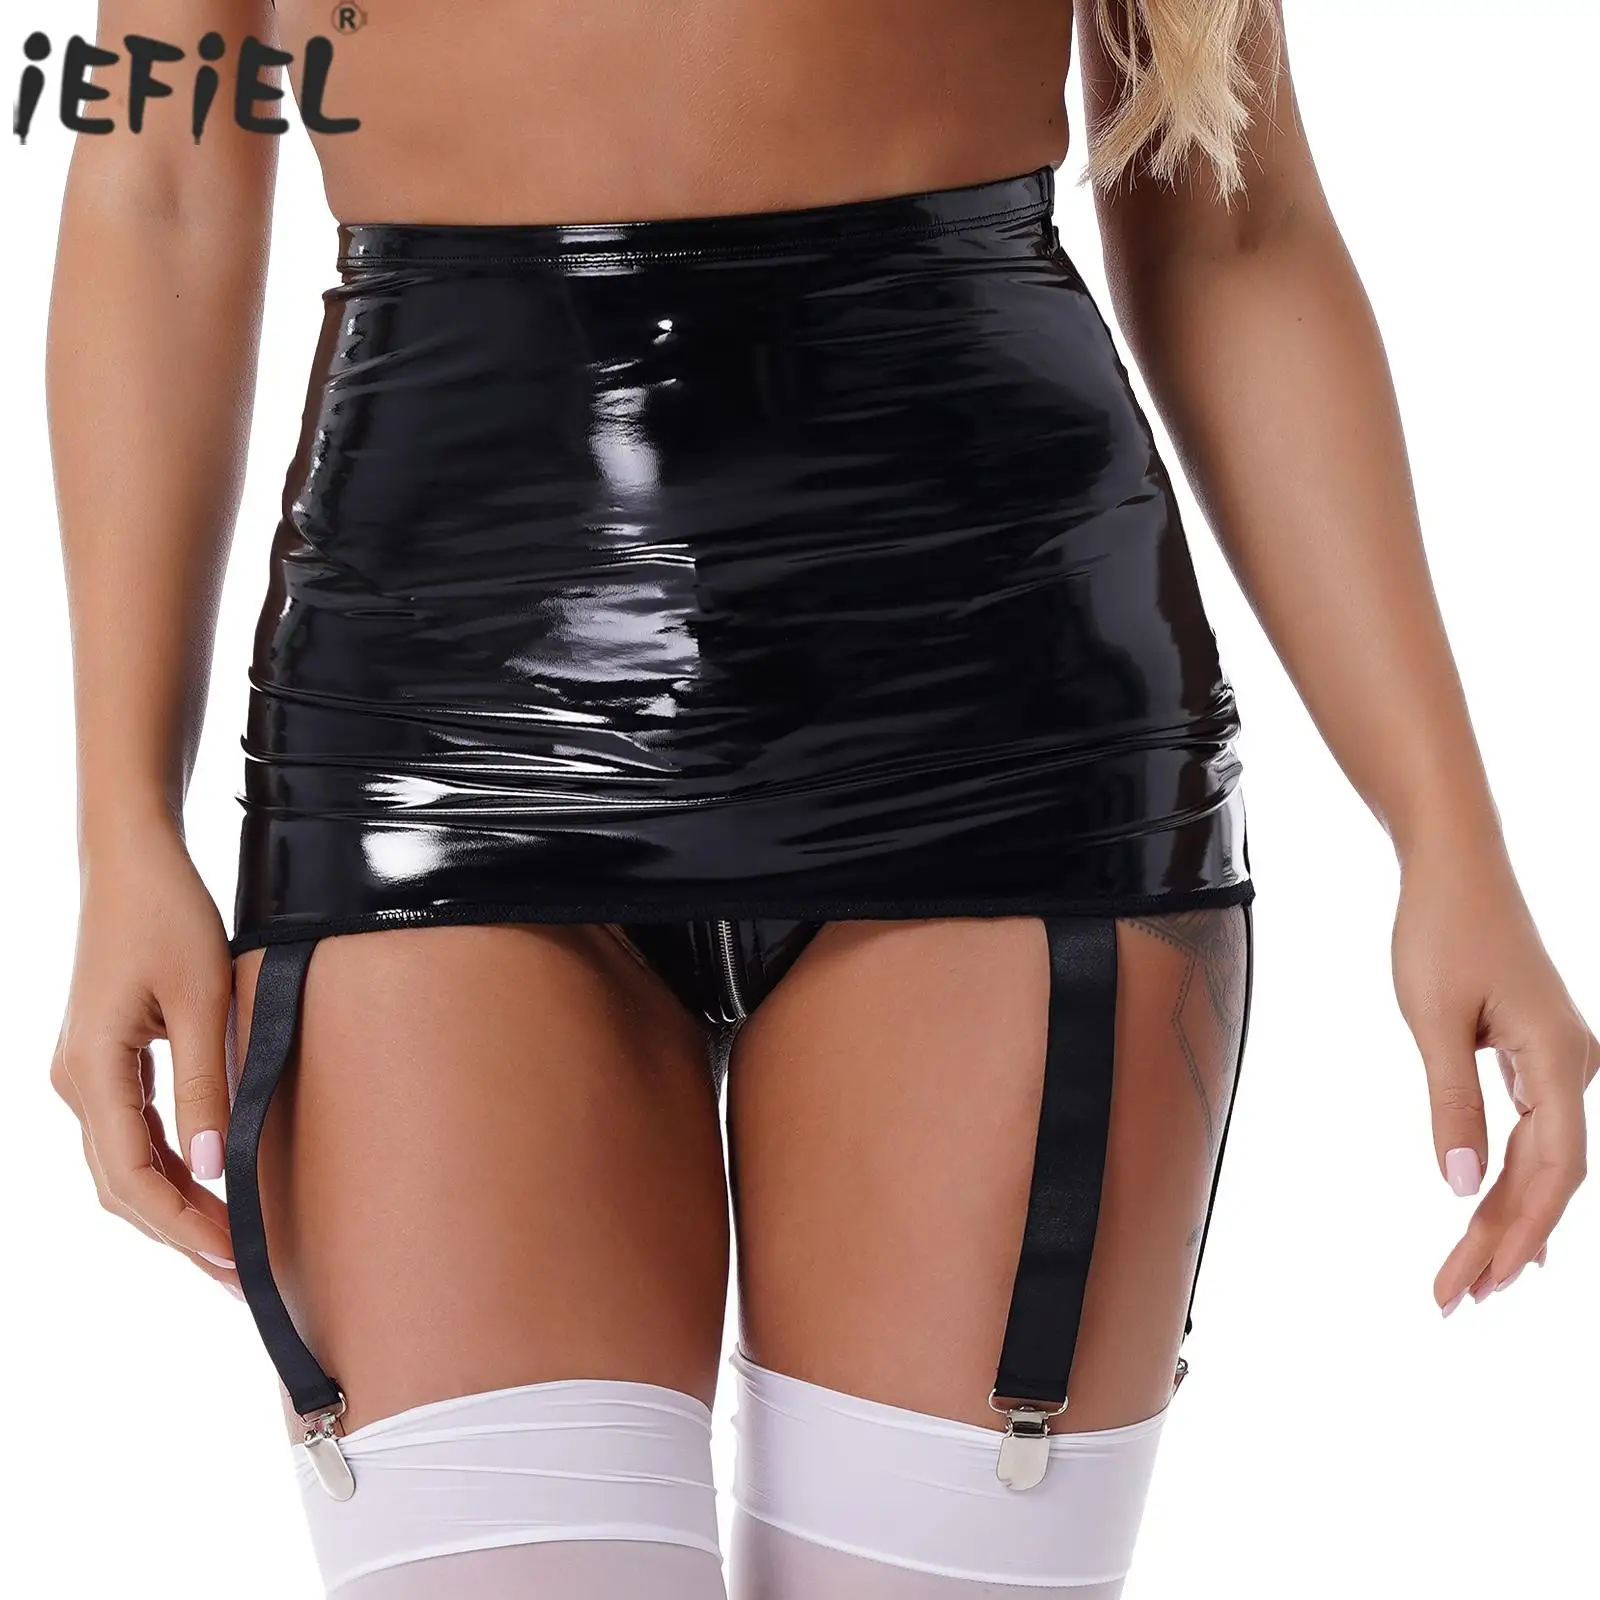 

Sexy Women Patent Leather Skirts Clubwear Elastic Waistband Glossy Garter Belt High Waist Suspenders with Six Metal Buckle Clips